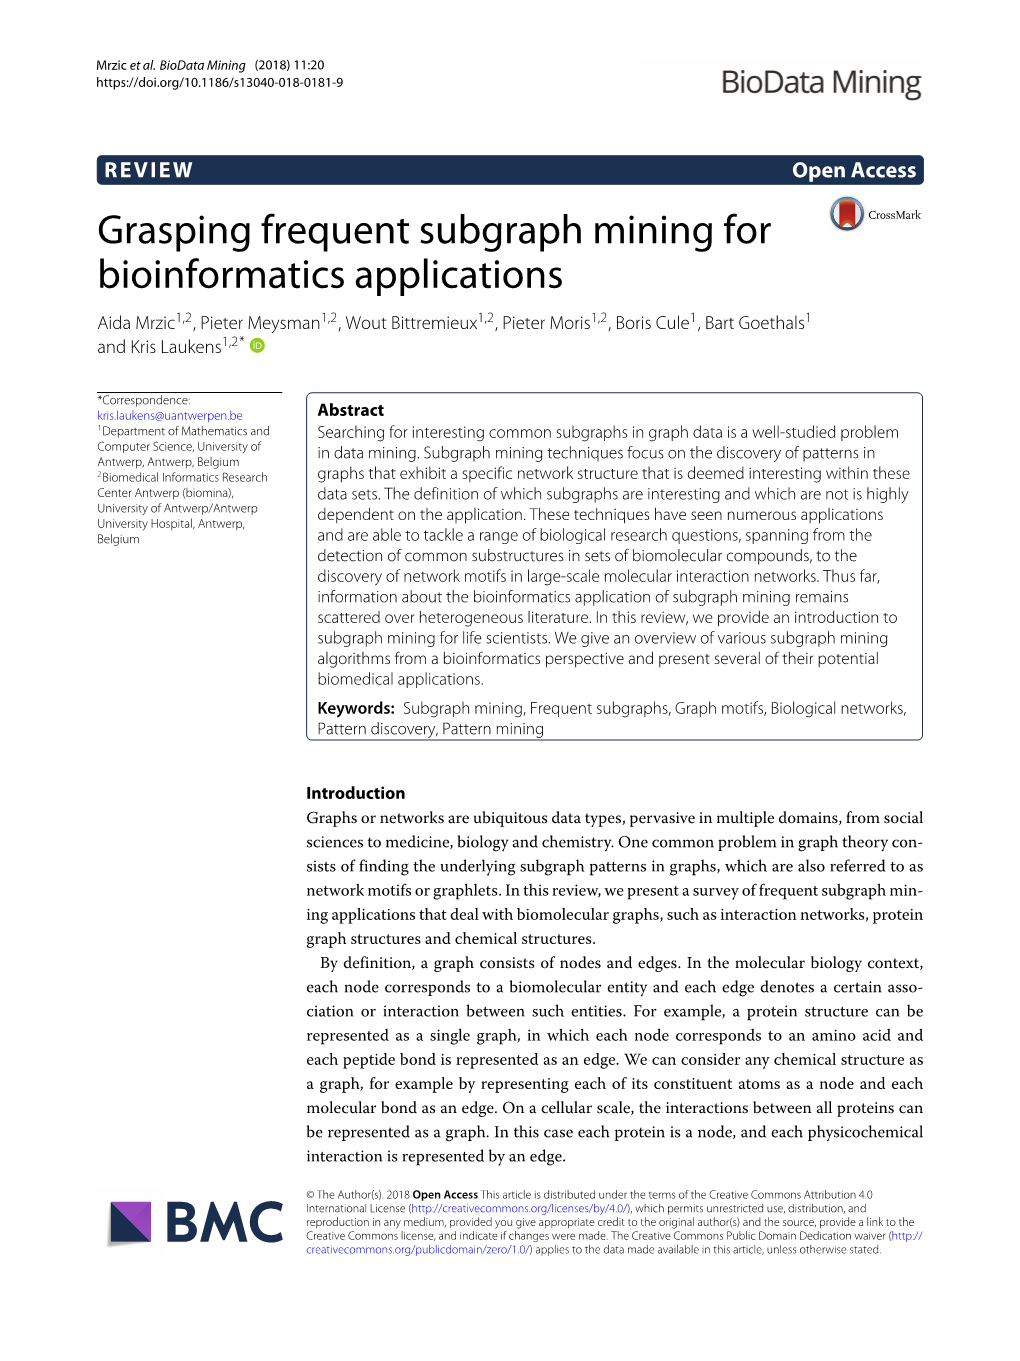 Grasping Frequent Subgraph Mining for Bioinformatics